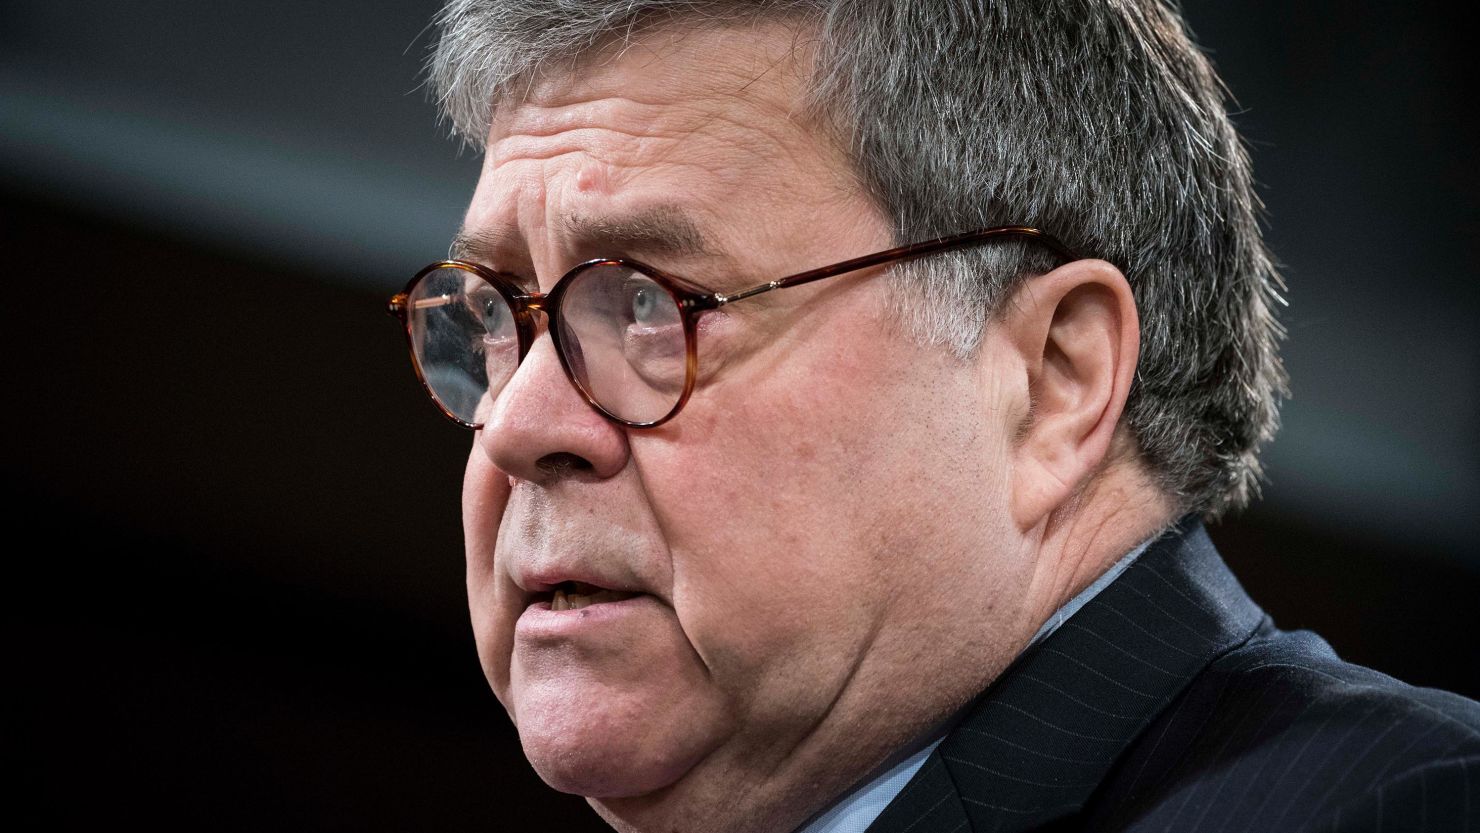 Attorney General William Barr participates in a press conference at the Department of Justice on February 10, 2020 in Washington.